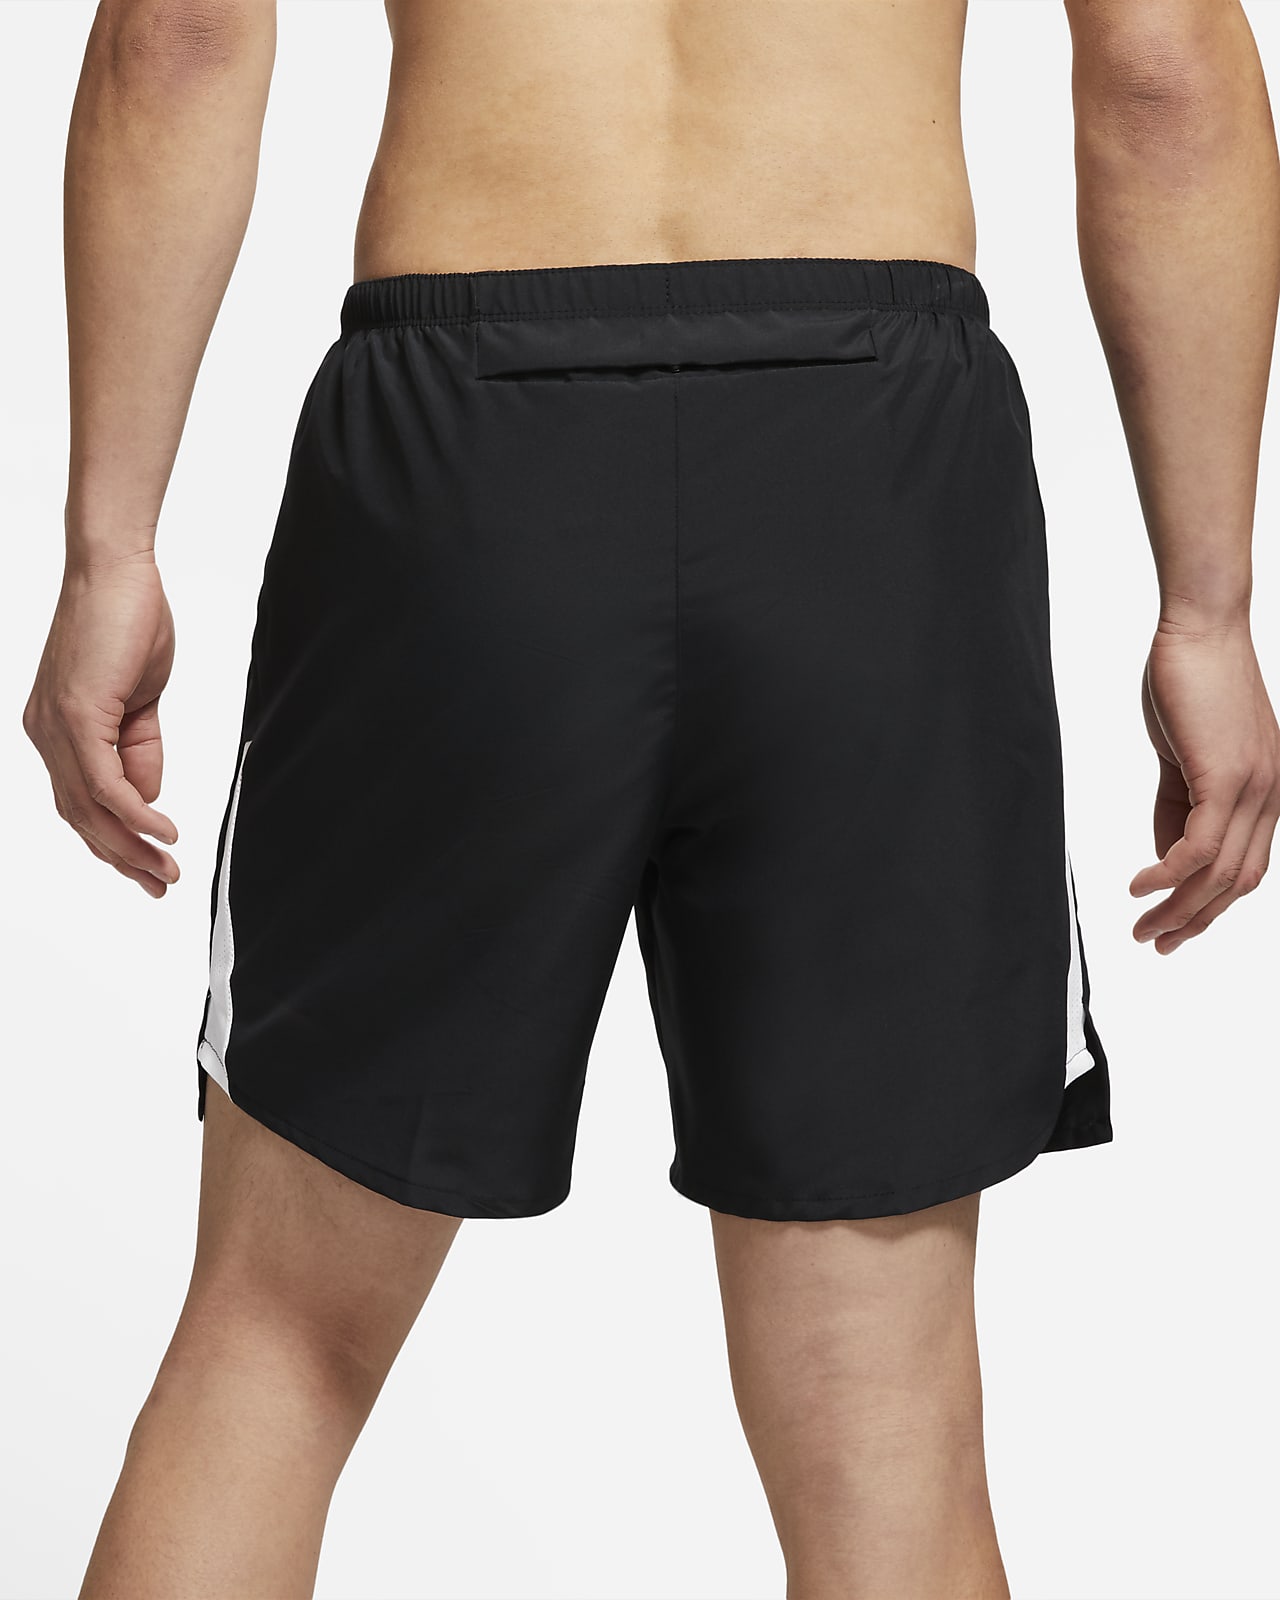 Brief-Lined Running Shorts. Nike ID